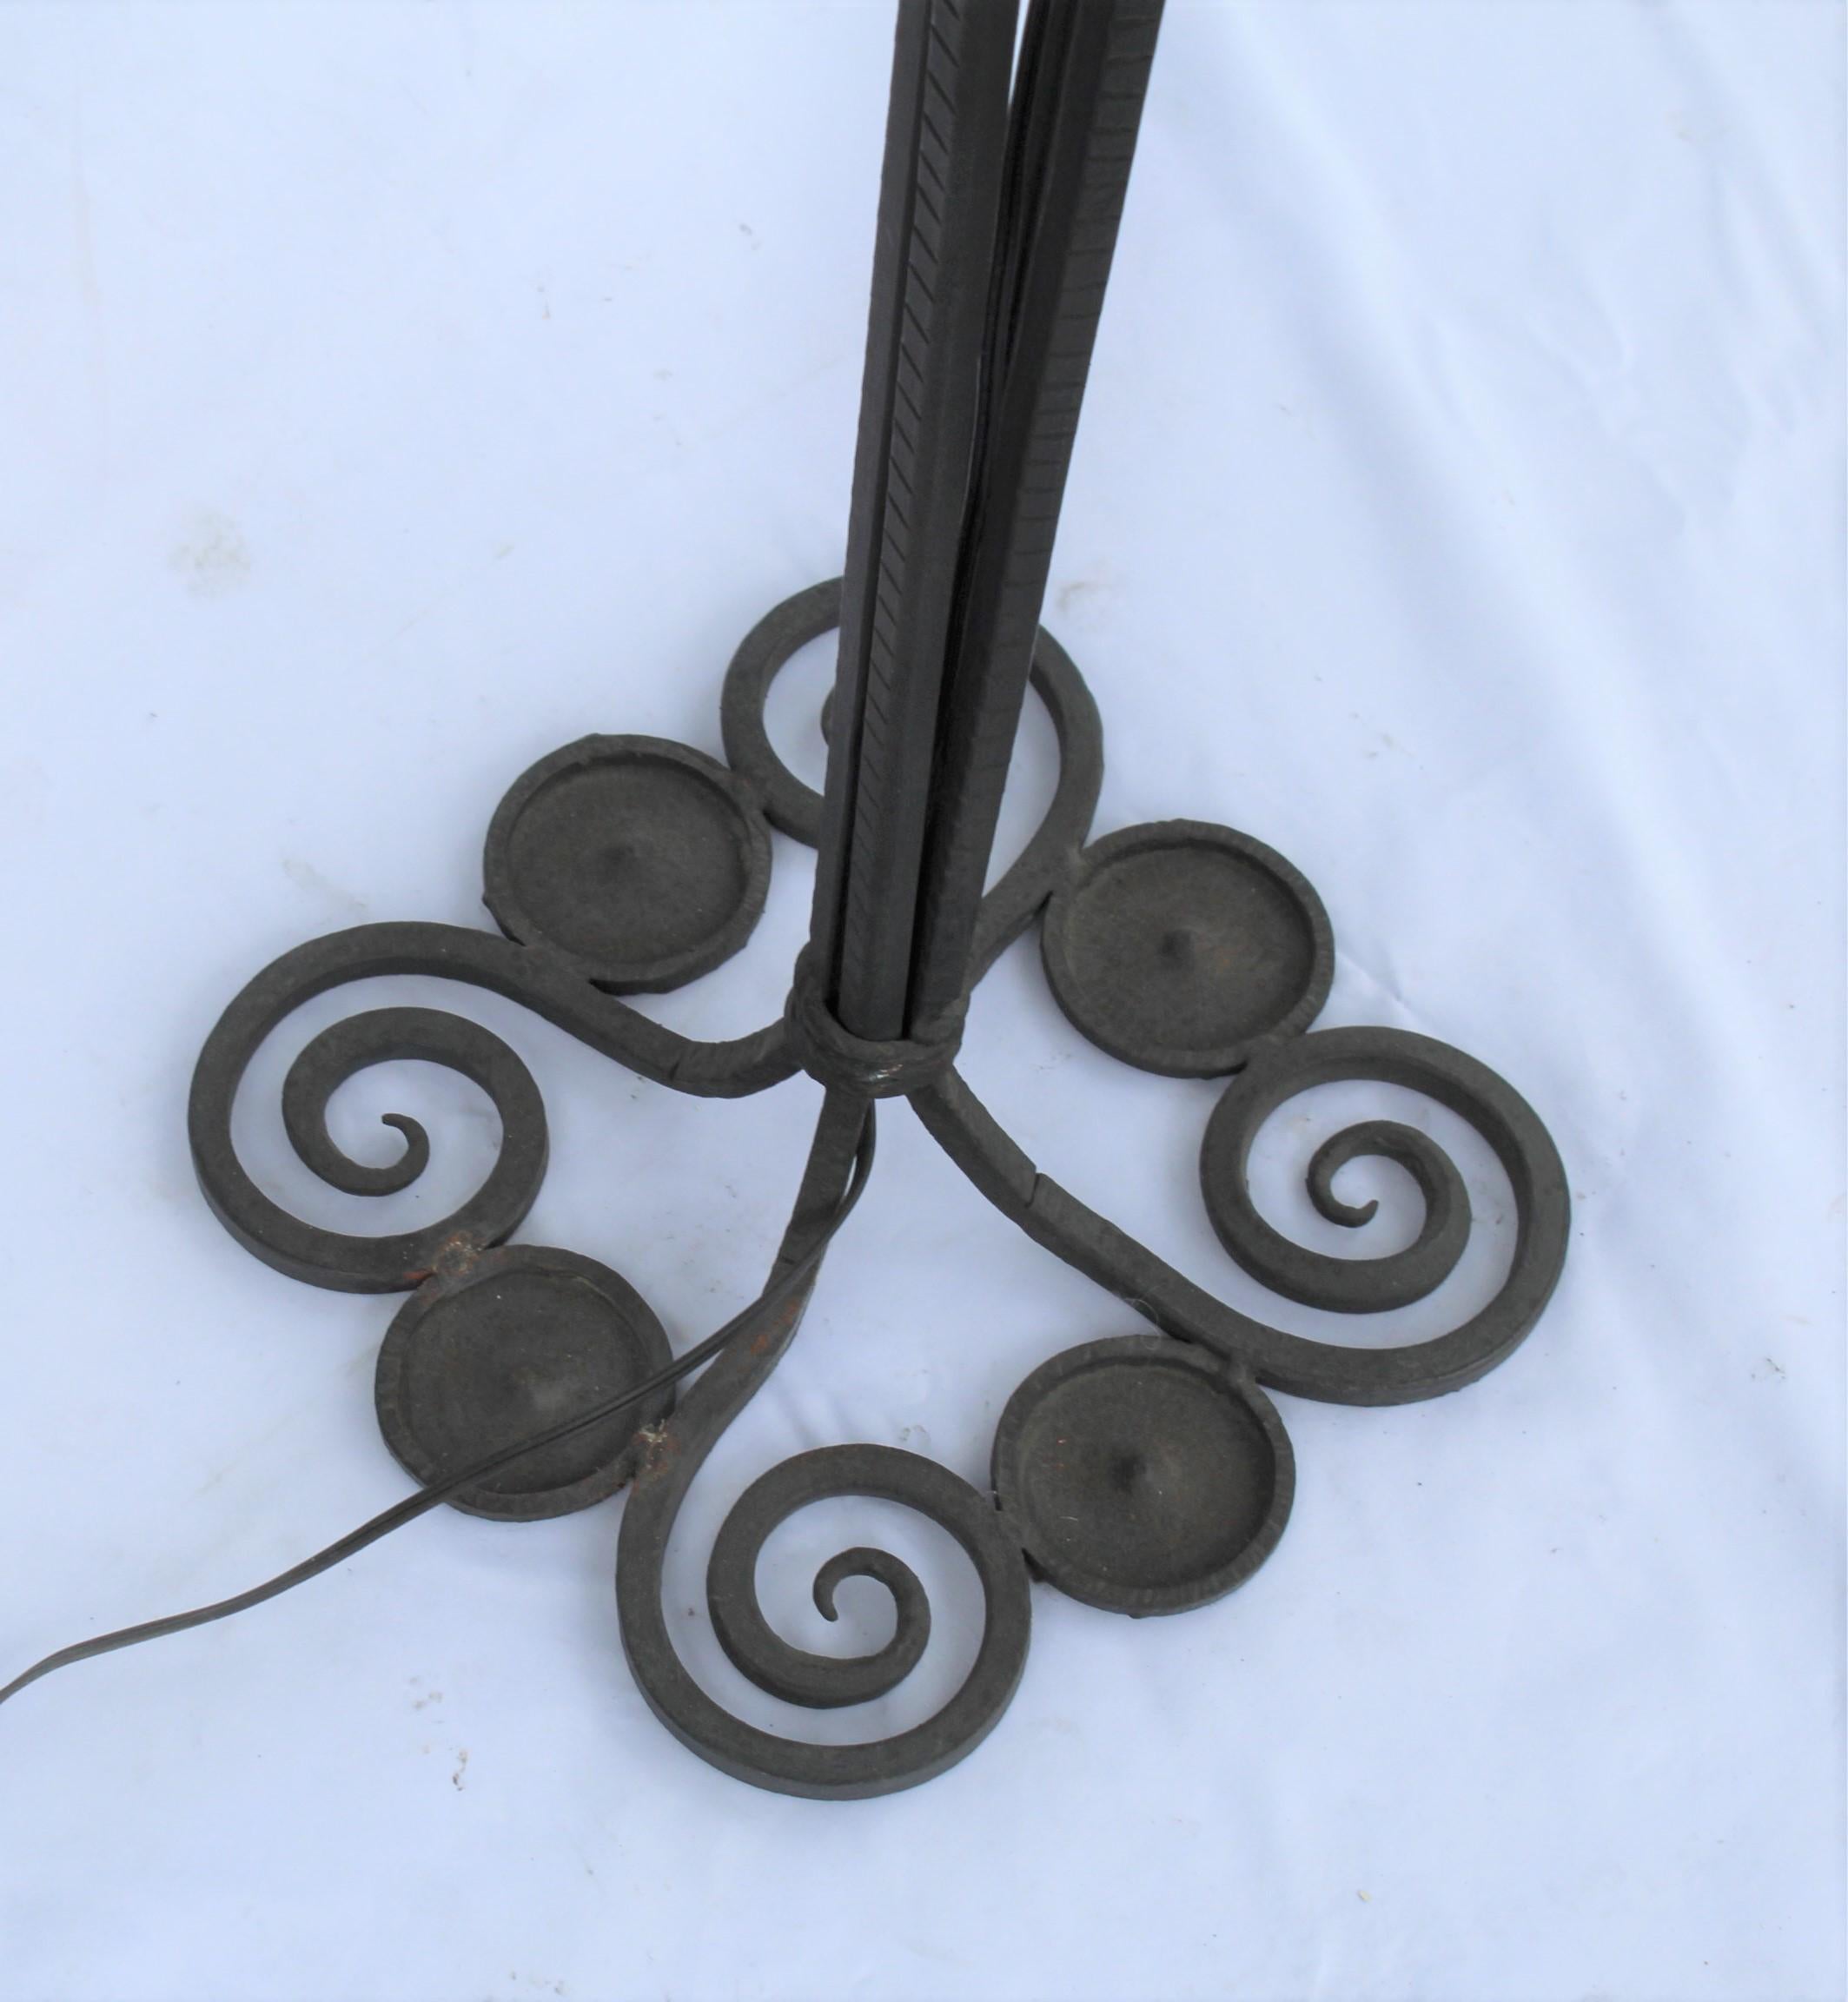 Modern/Deco Floor Lamp, Art Glass Shade, Forged Iron Base In Good Condition For Sale In Los Angeles, CA